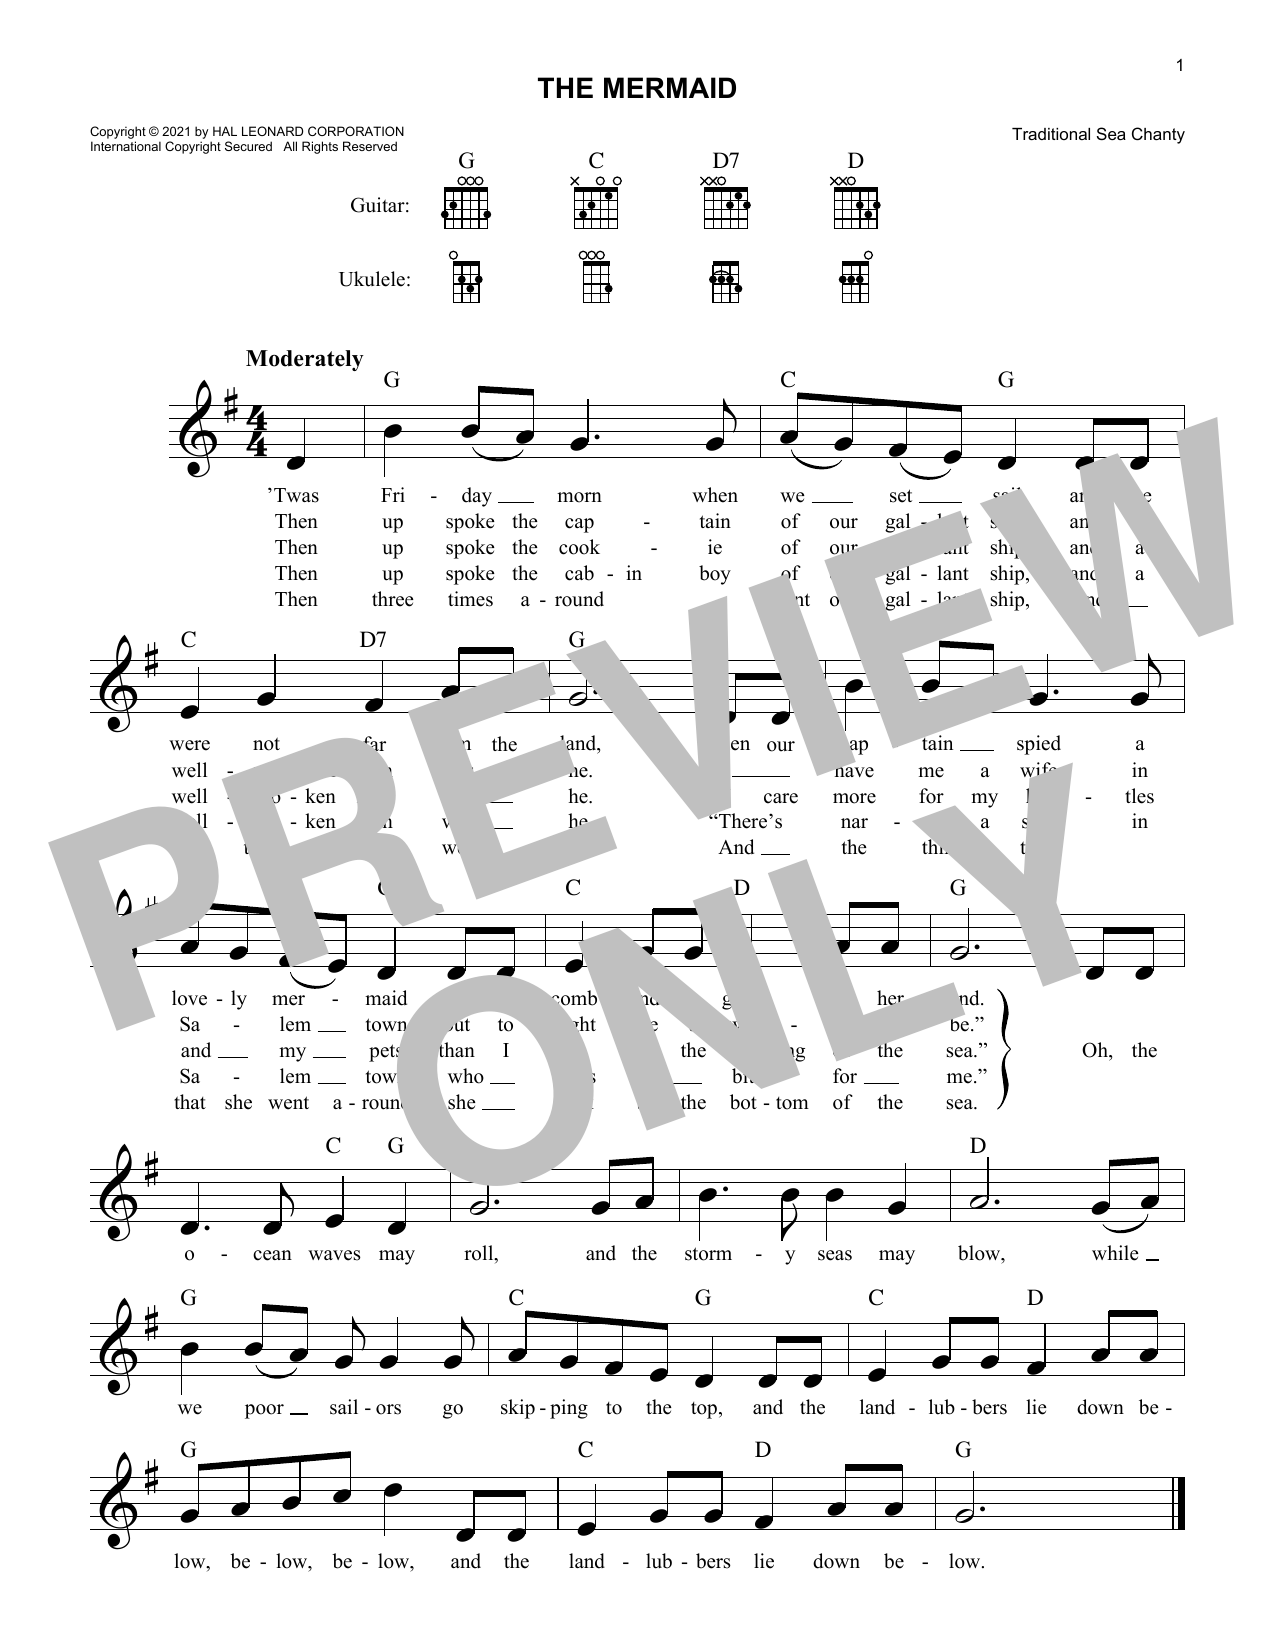 Download Traditional Sea Chanty The Mermaid Sheet Music